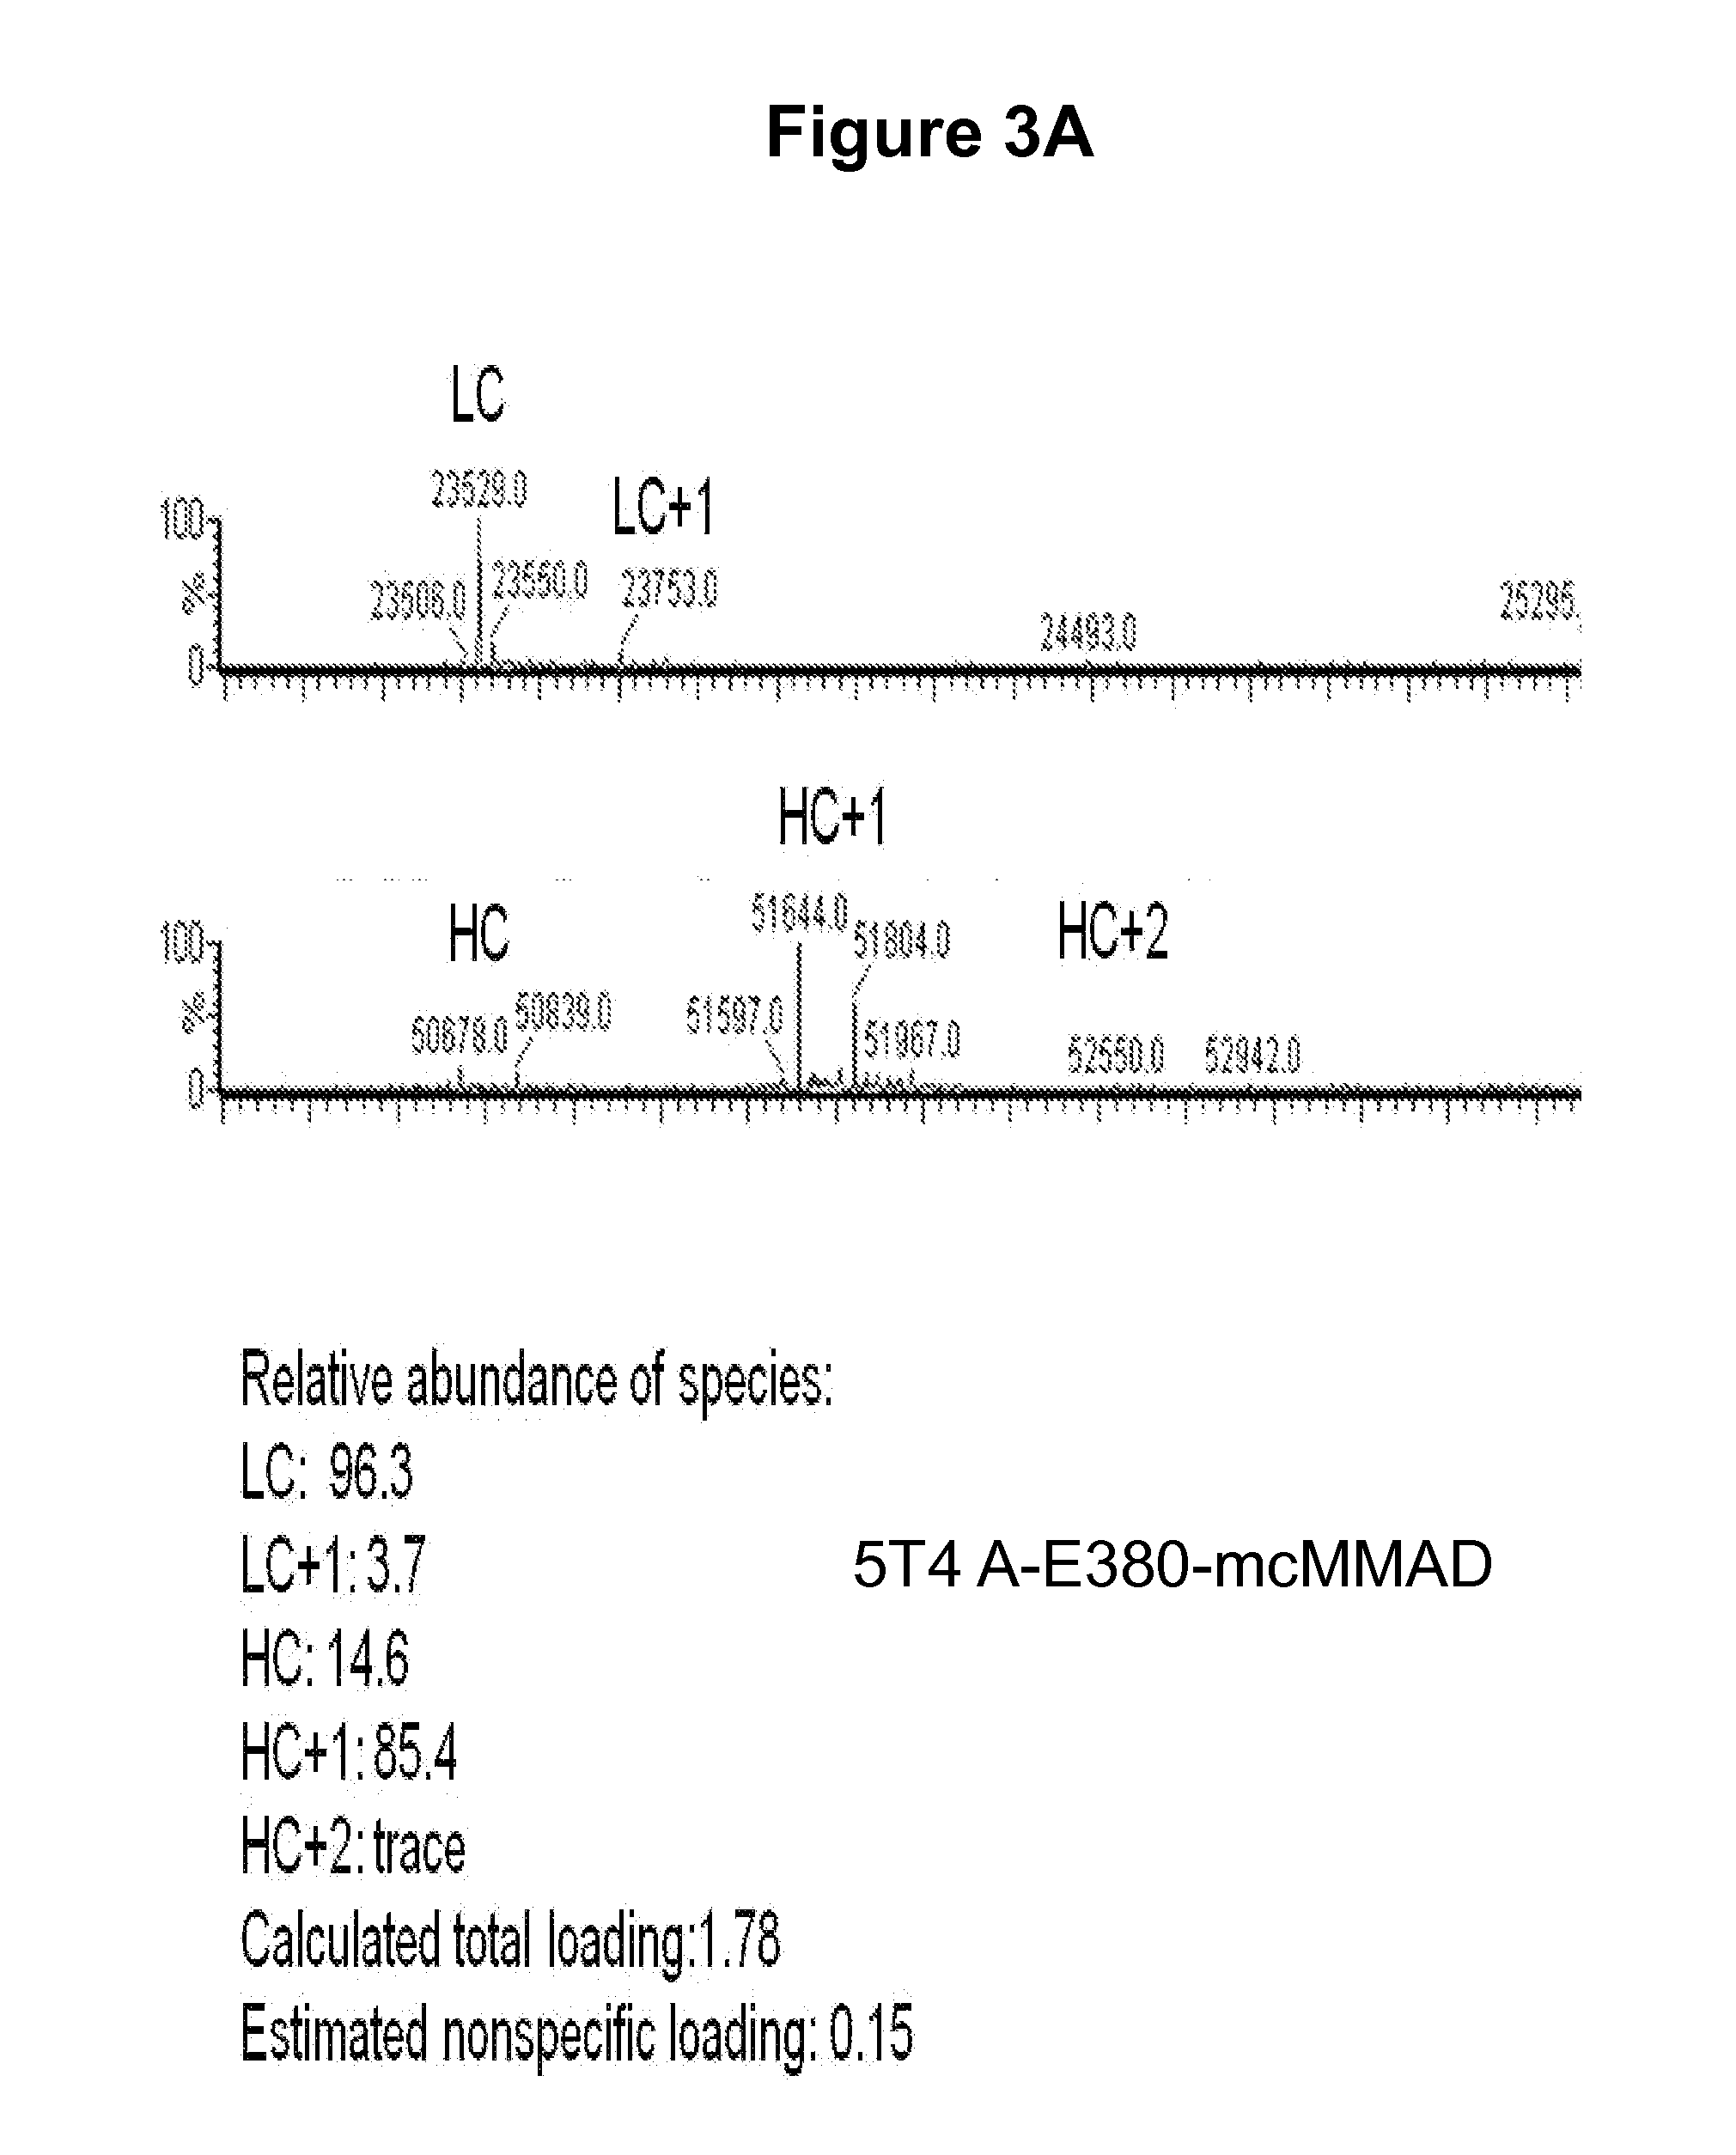 Engineered Antibody Constant Regions for Site-Specific Conjugation and Methods and Uses Therefor